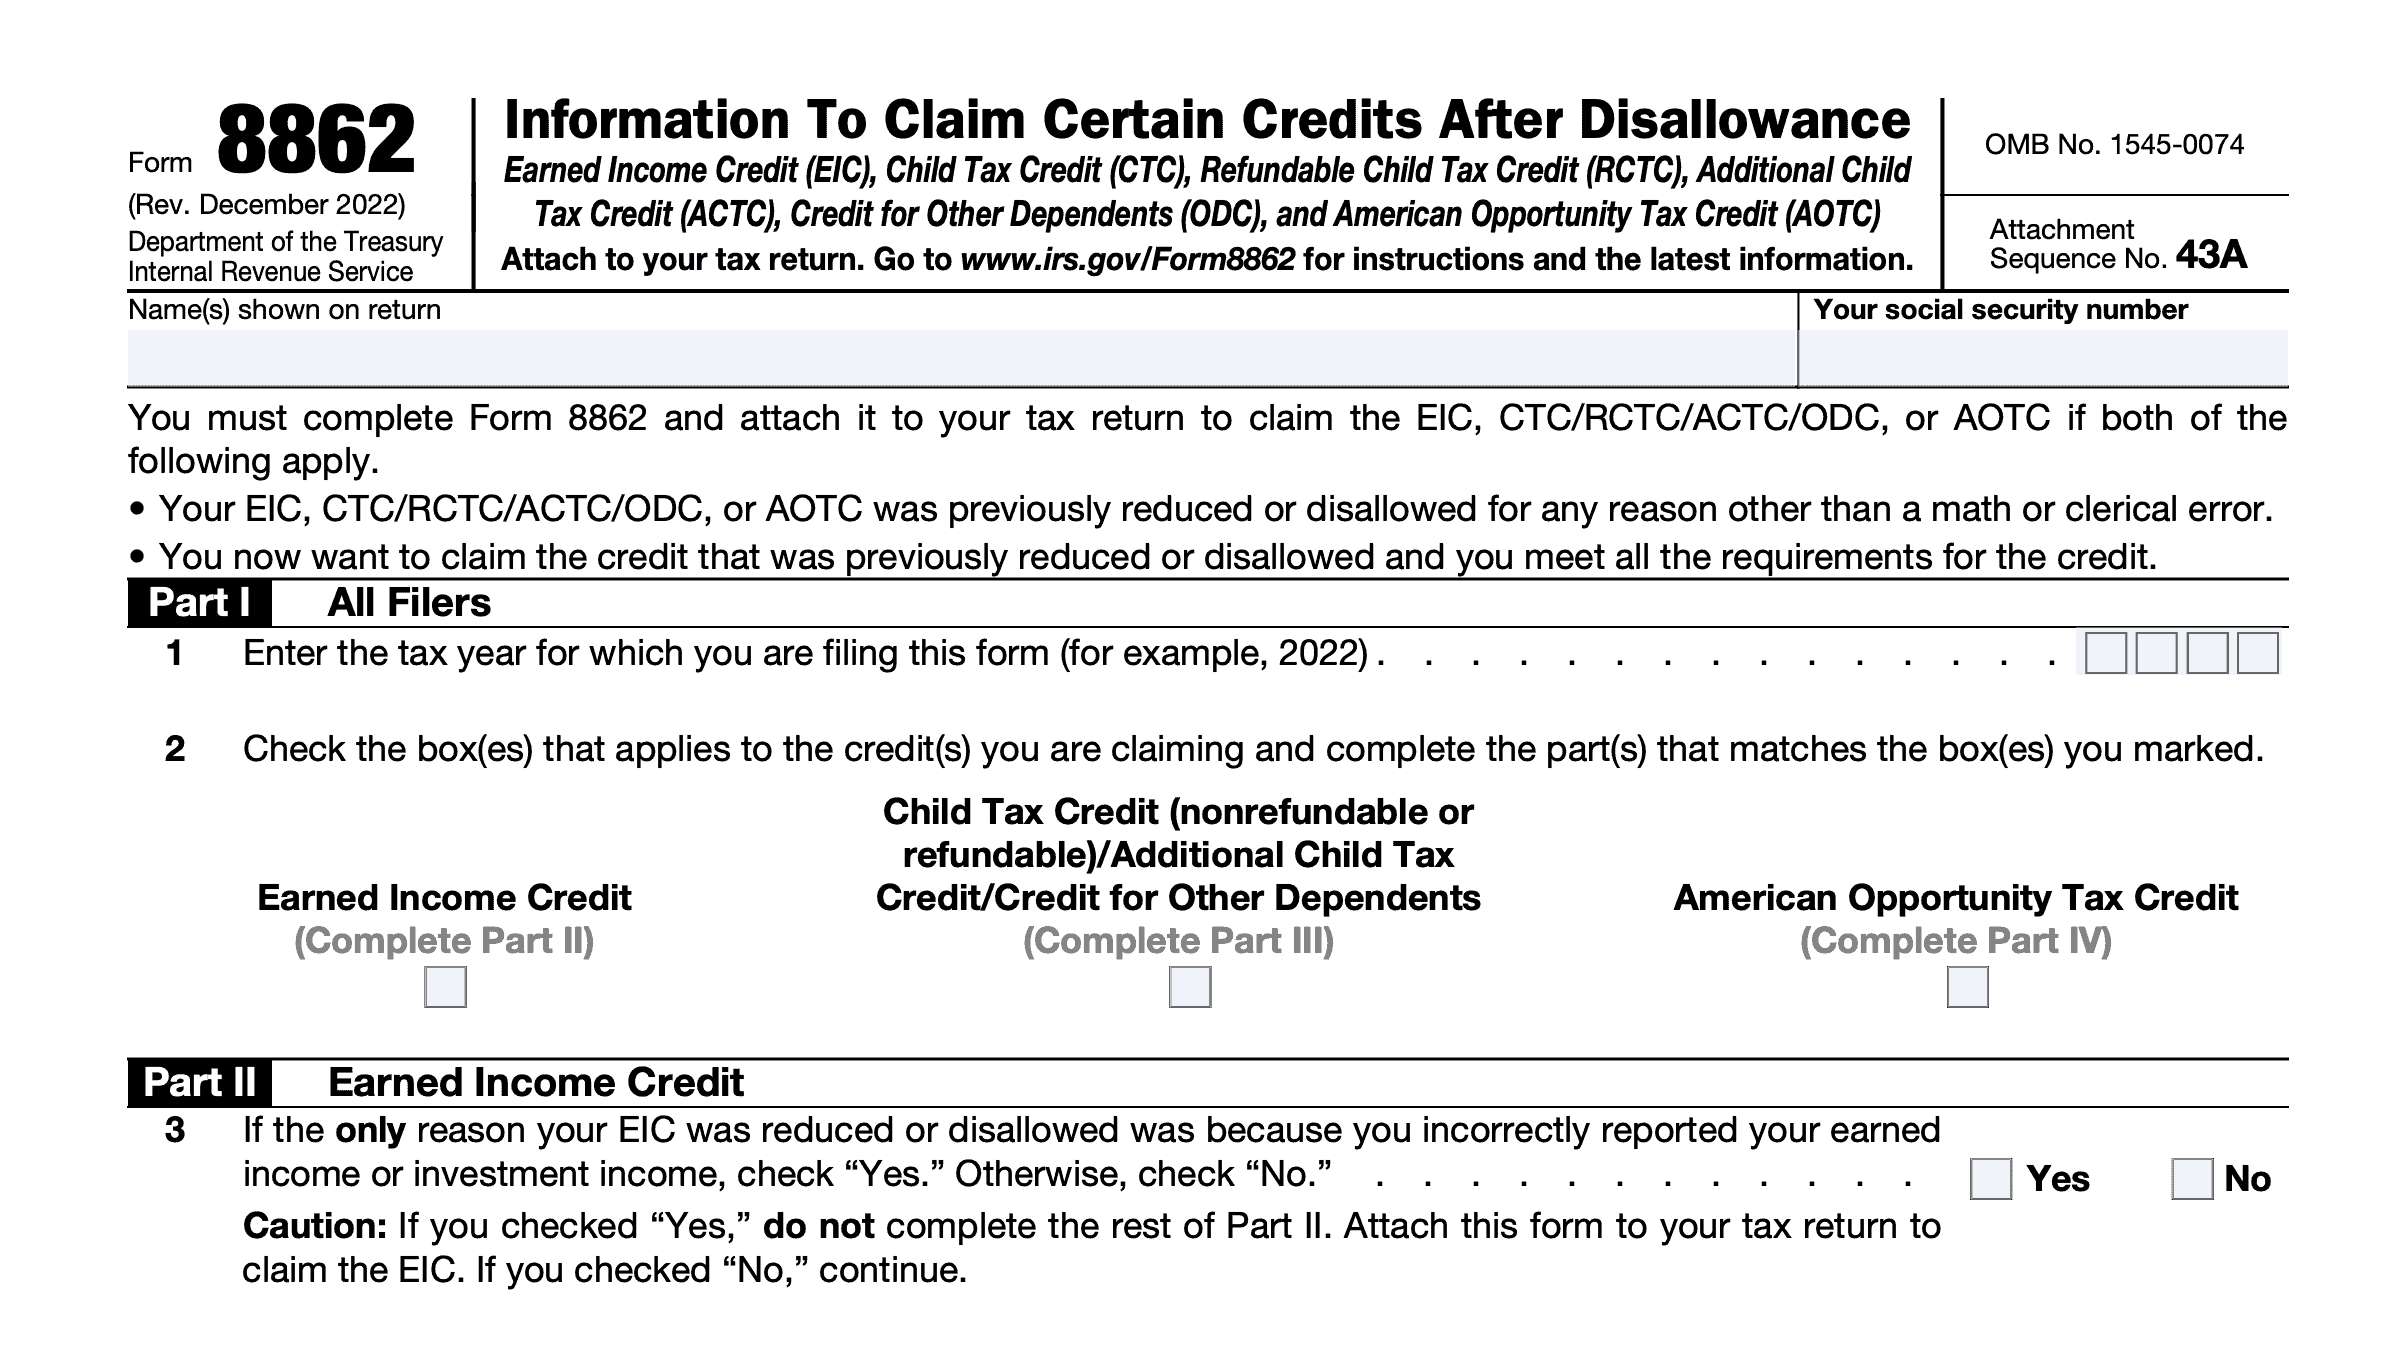 irs-form-8862-claiming-certain-tax-credits-after-disallowance